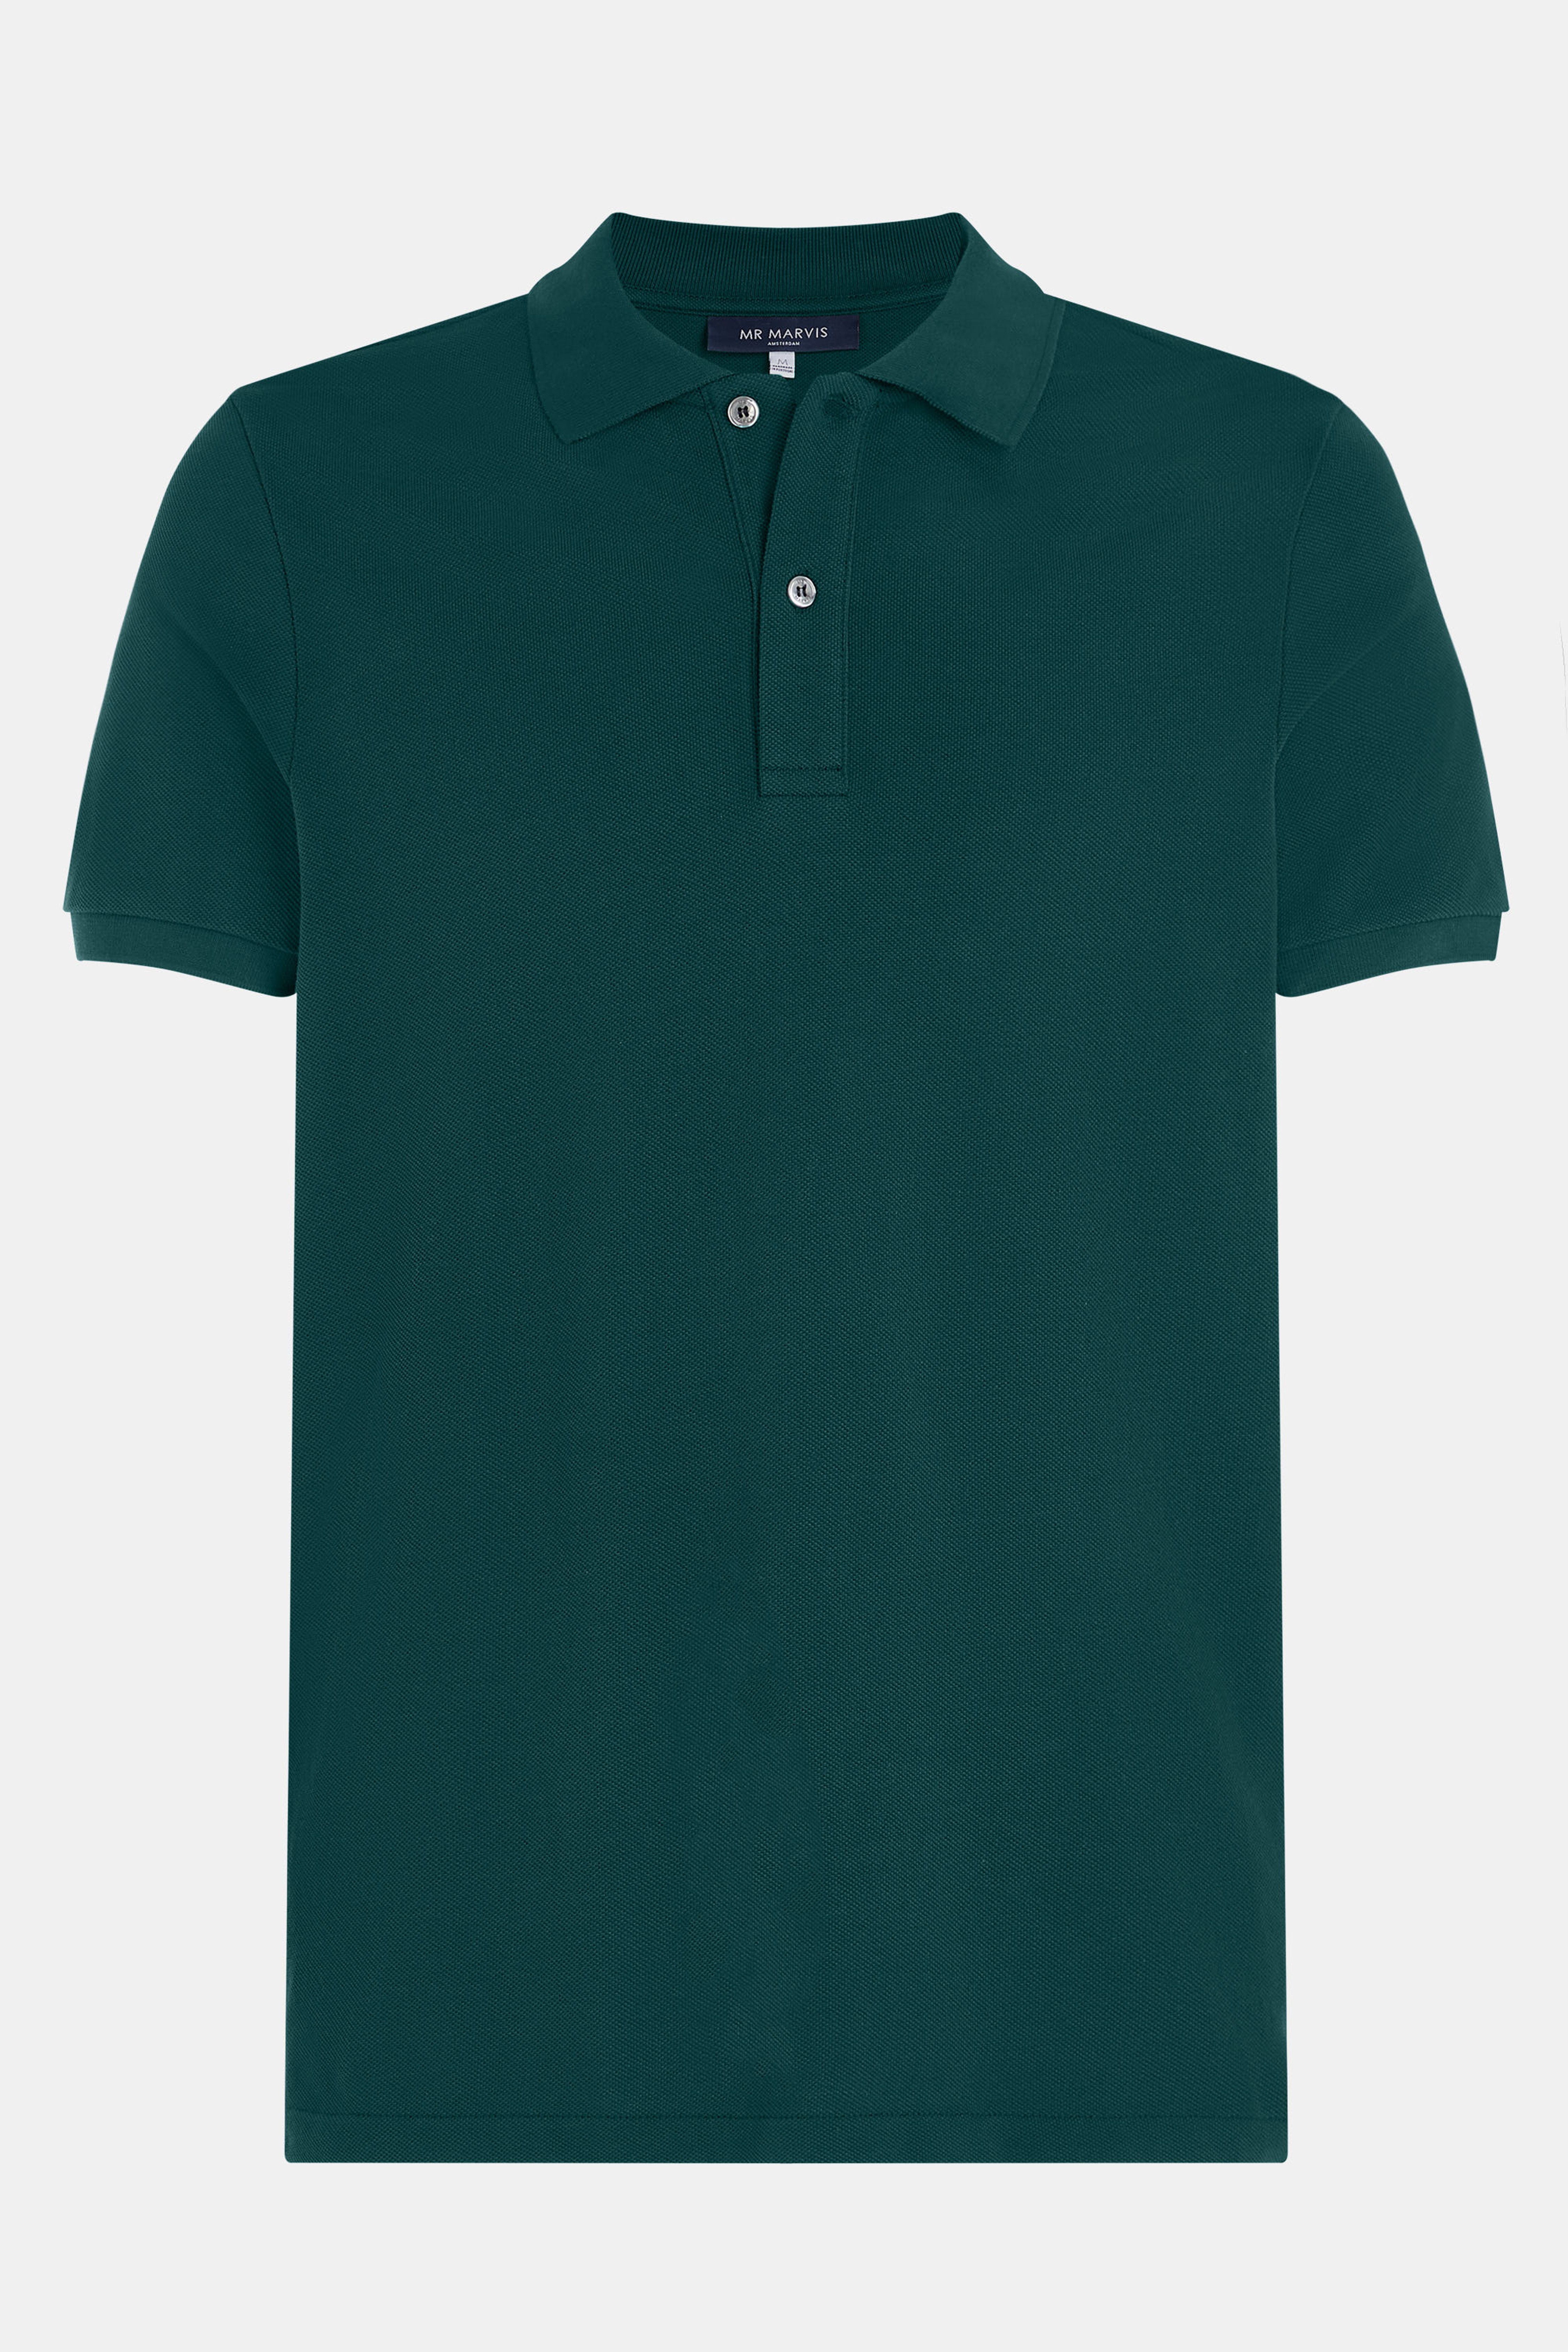 Goodwoods - The Classic Polo